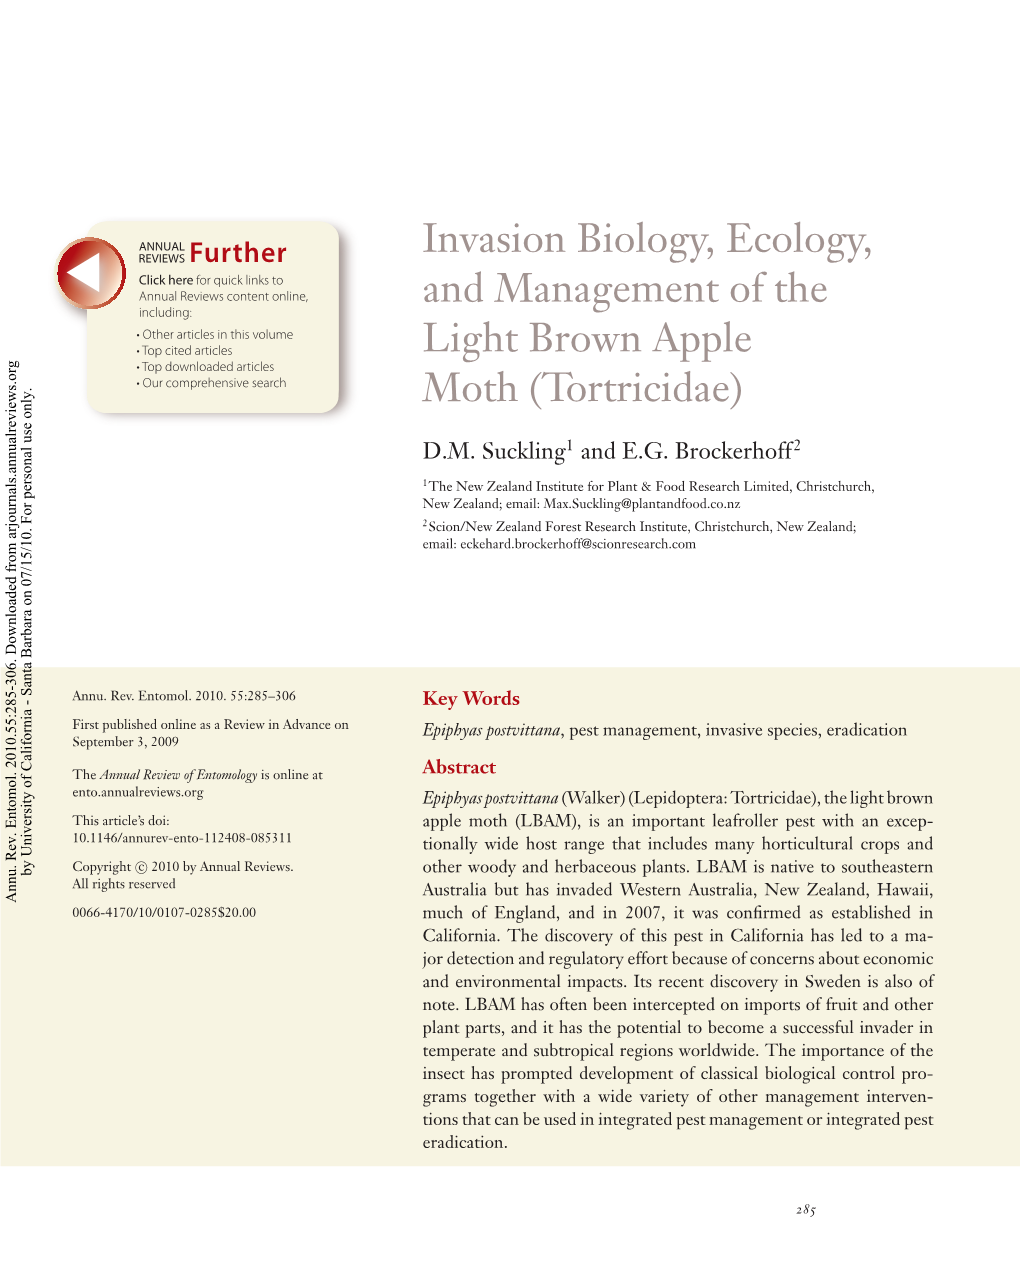 Invasion Biology, Ecology, and Management of the Light Brown Apple Moth (Tortricidae)